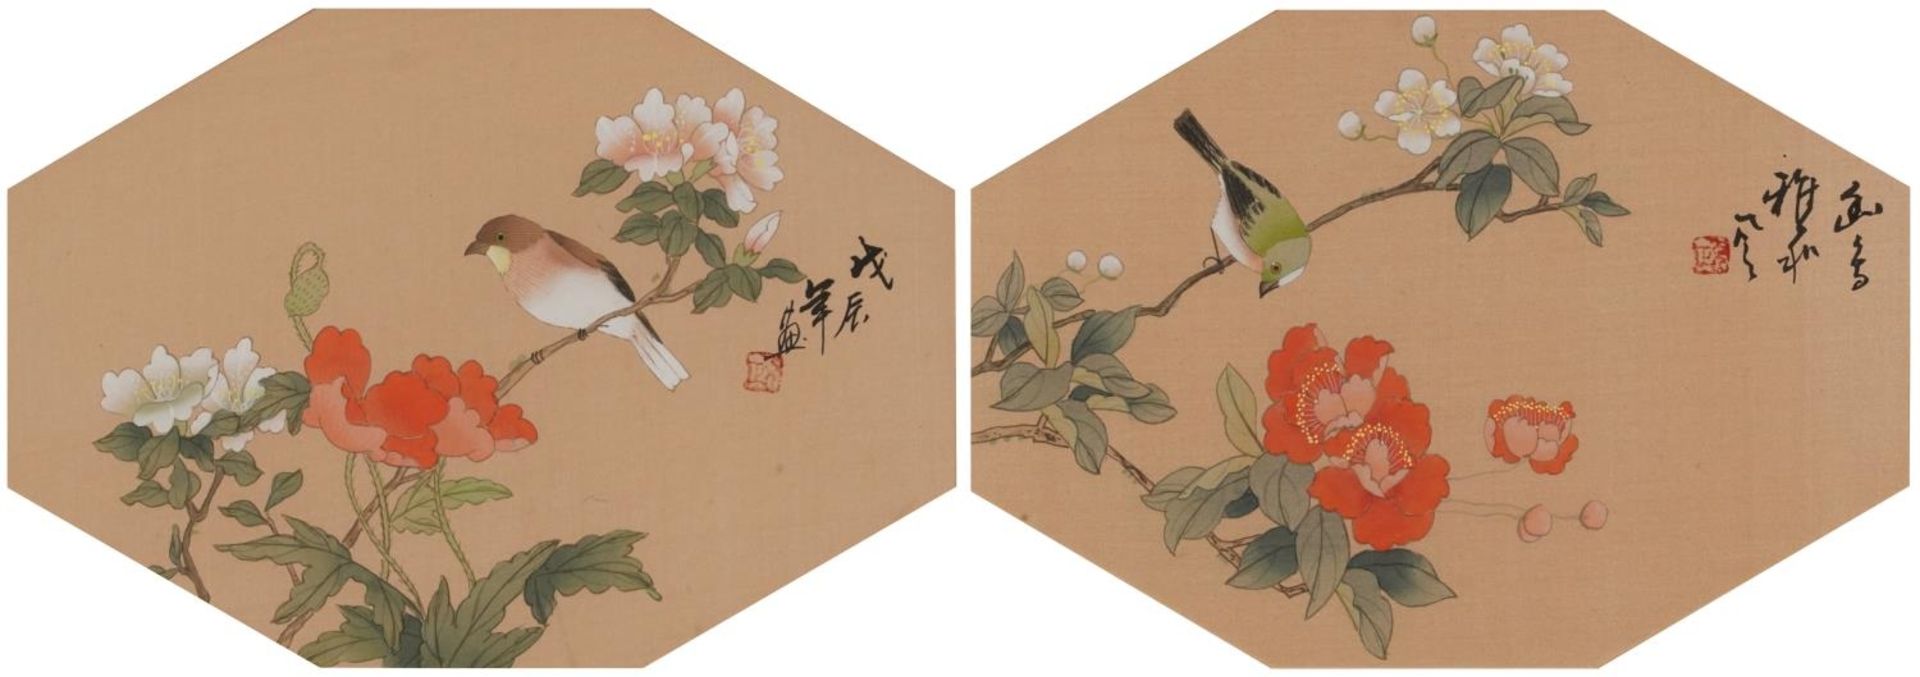 Birds amongst chrysanthemums, pair of Chinese watercolours onto silk with calligraphy and red seal